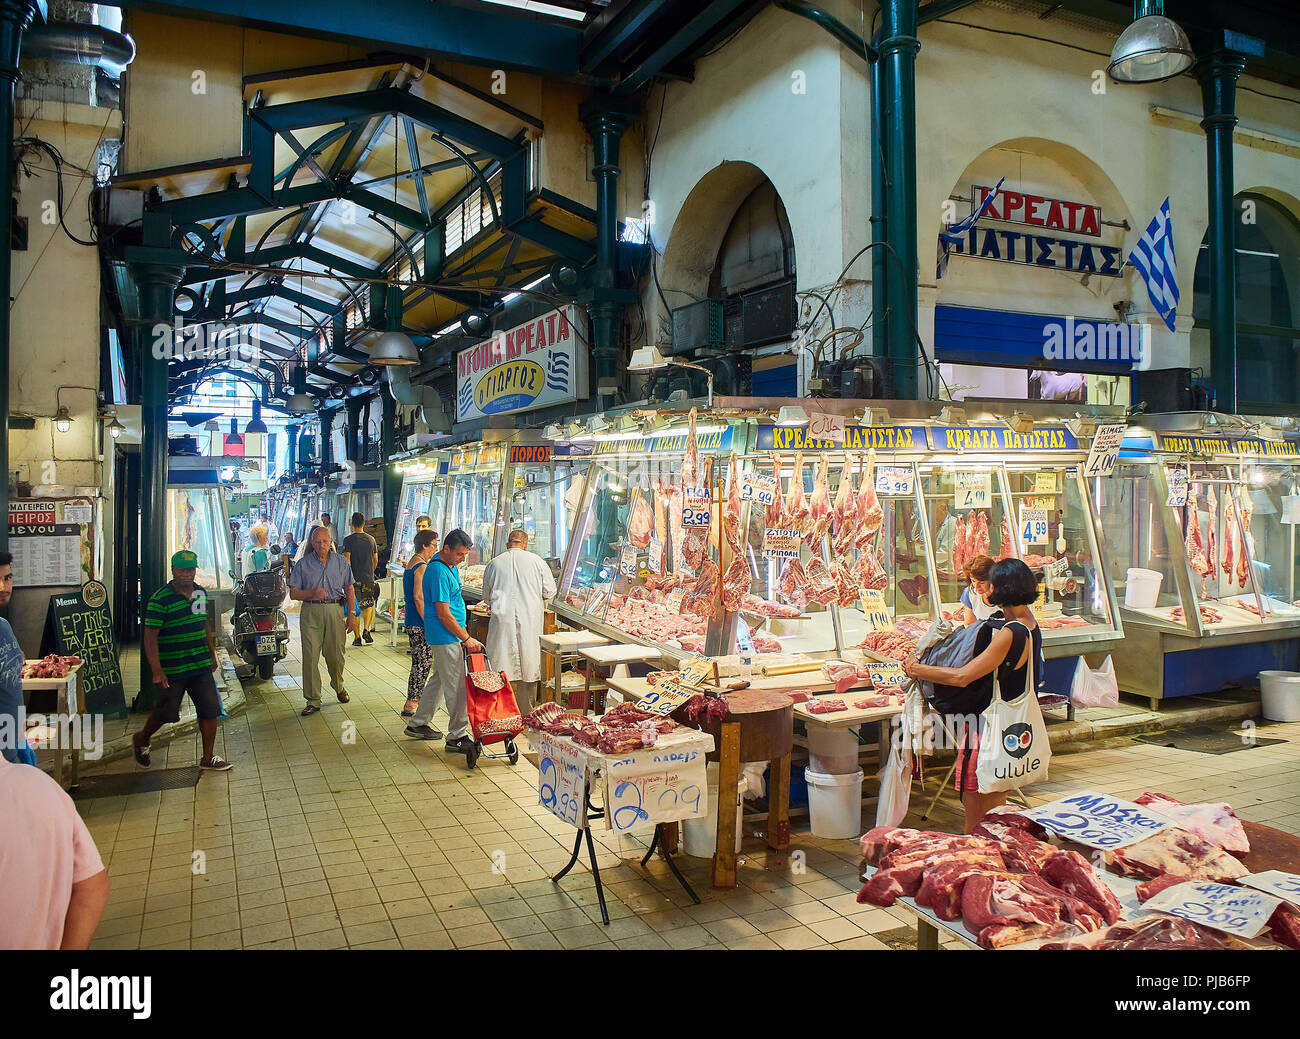 Varvakios Market High Resolution Stock Photography and Images - Alamy